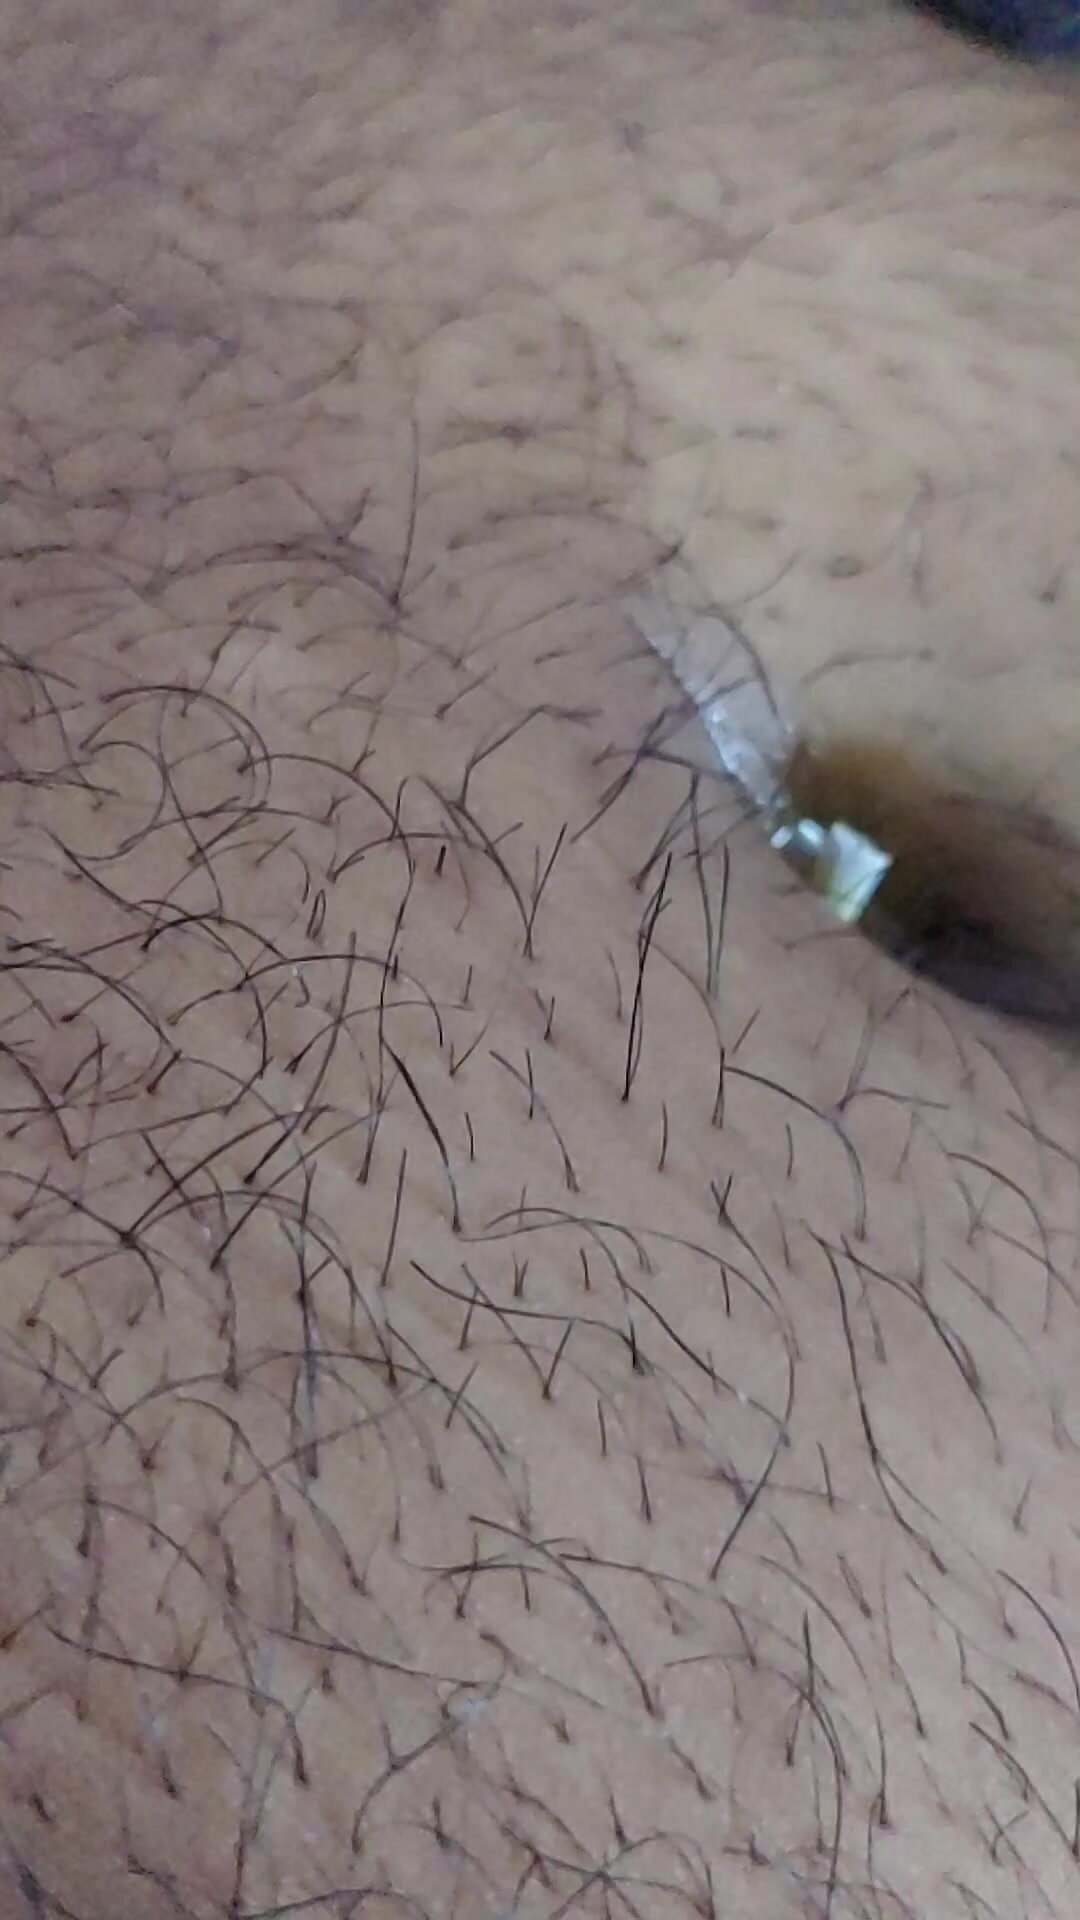 Wire moving in my navel